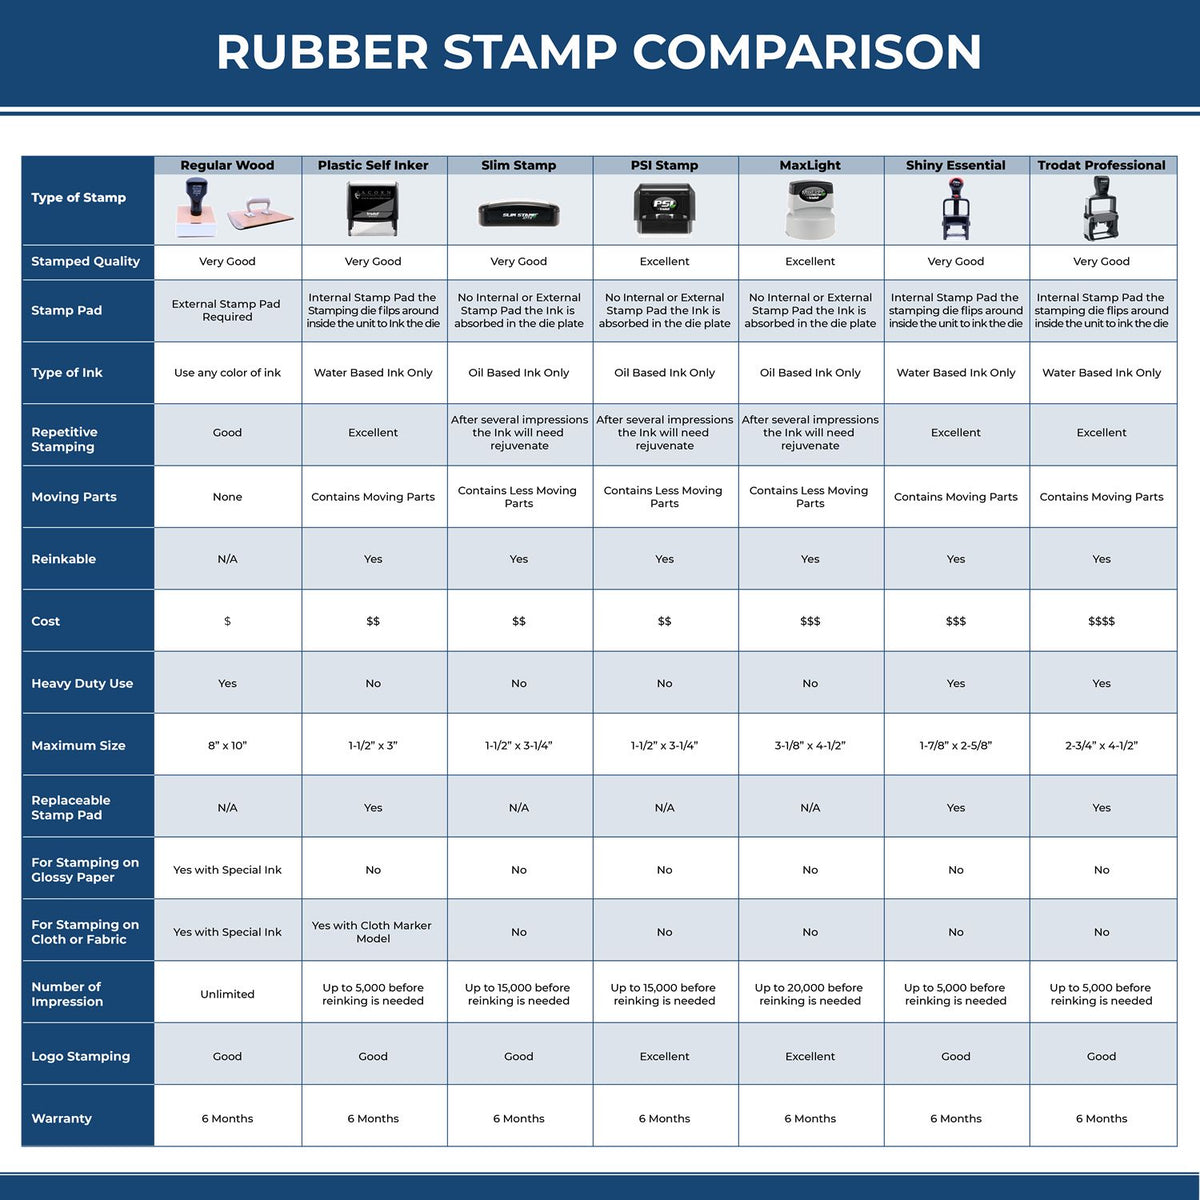 A comparison chart for the different types of mount models available for the Self-Inking Rectangular Oregon Notary Stamp.